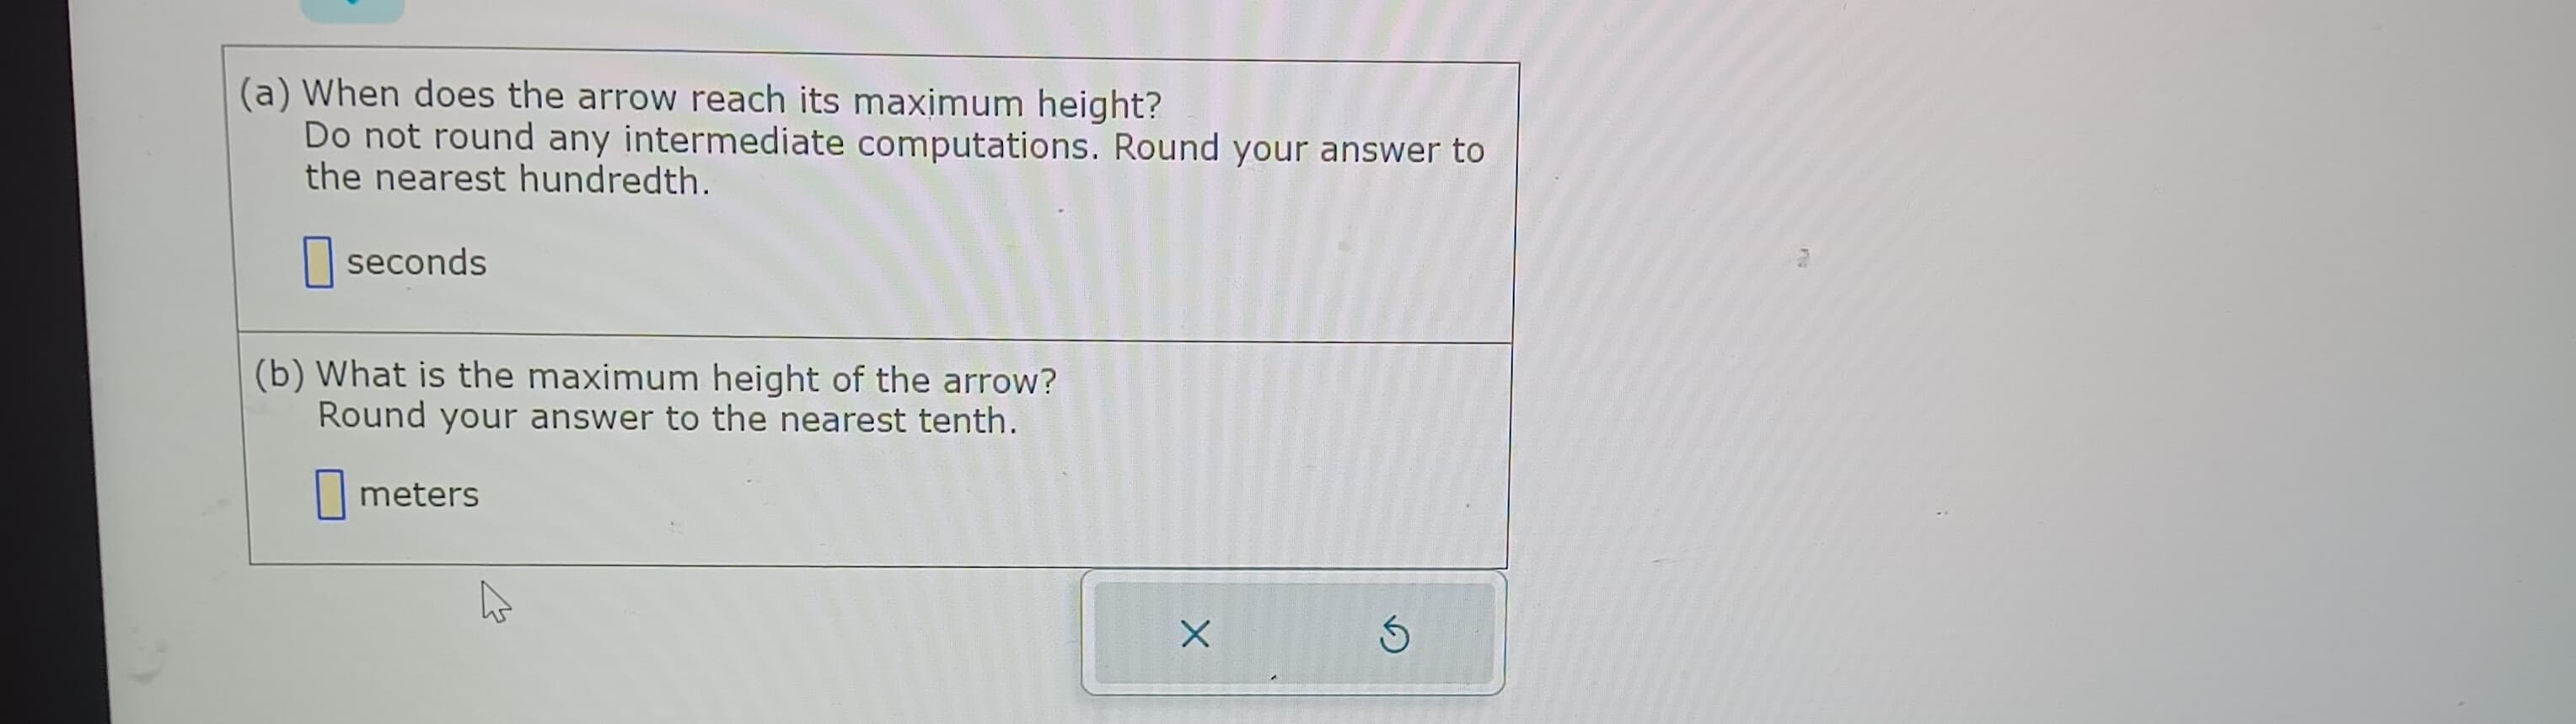 (a) When does the arrow reach its maximum height?
Do not round any intermediate computations. Round your answer to
the nearest hundredth.
seconds
(b) What is the maximum height of the arrow?
Round your answer to the nearest tenth.
meters
X
Ś
FR